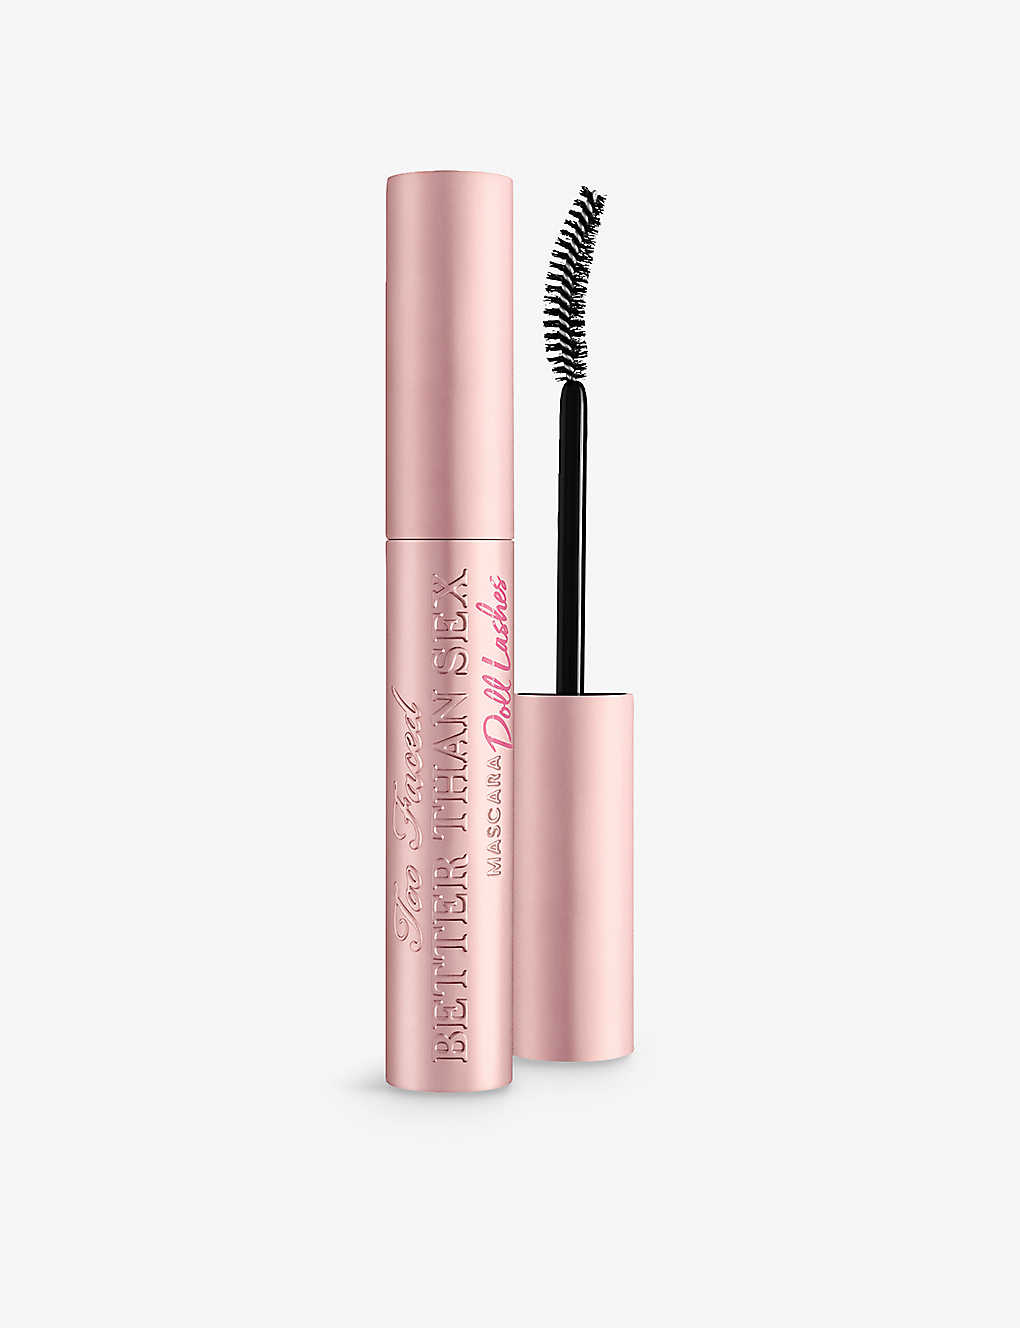 Too Faced Better Than Sex Doll Lashes Mascara 8.9ml In Black